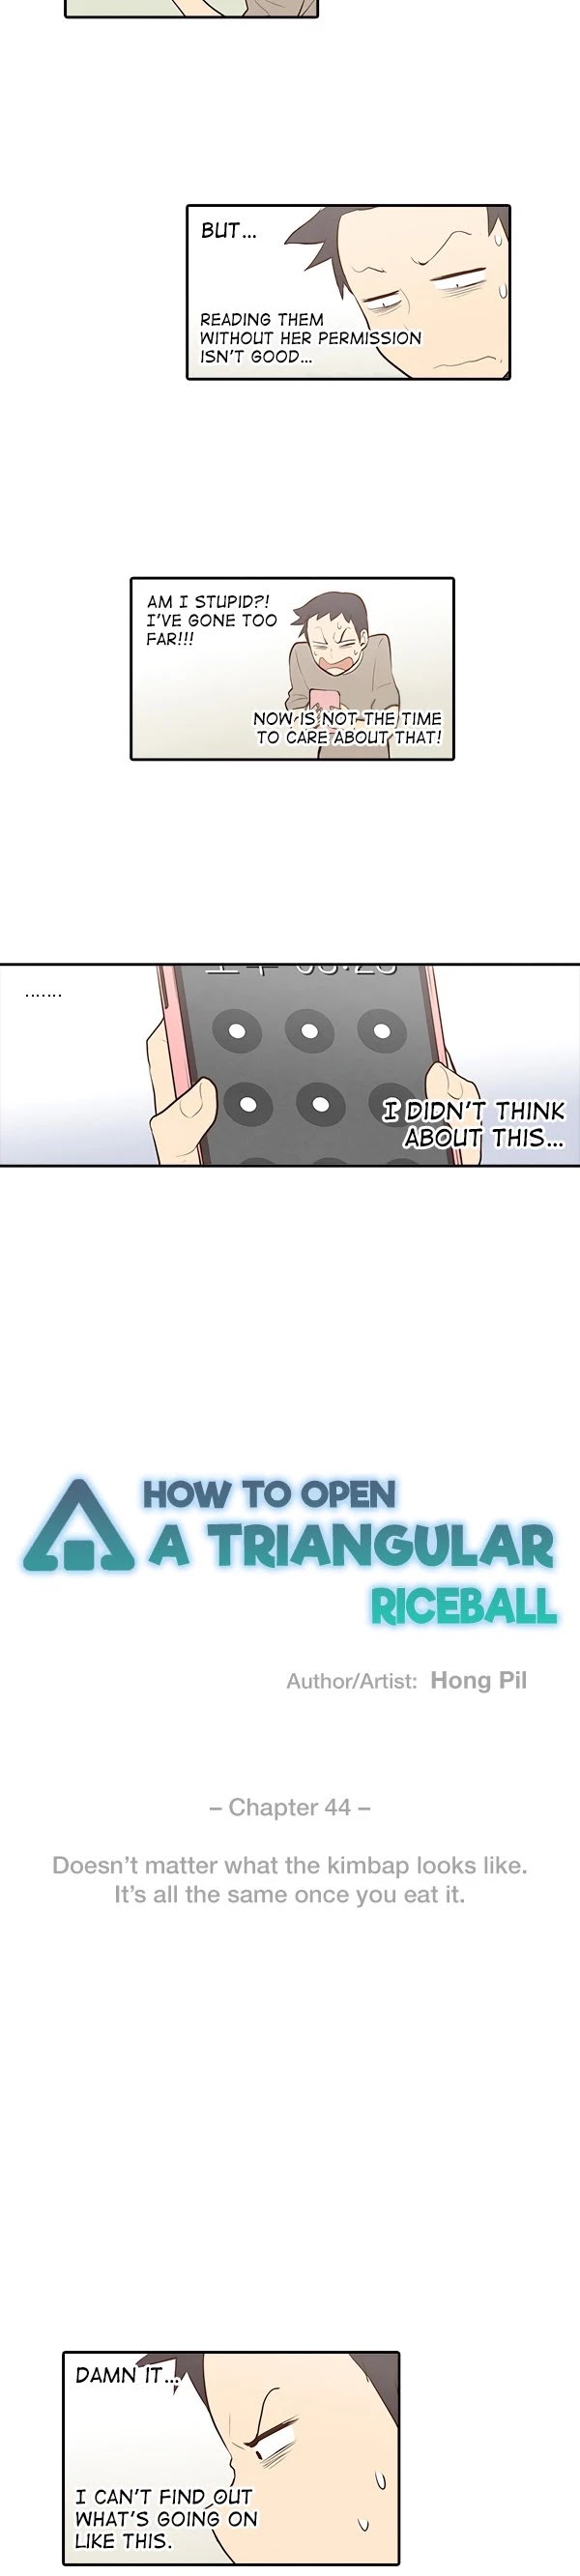 How To Open A Triangular Riceball Chapter 44 #4